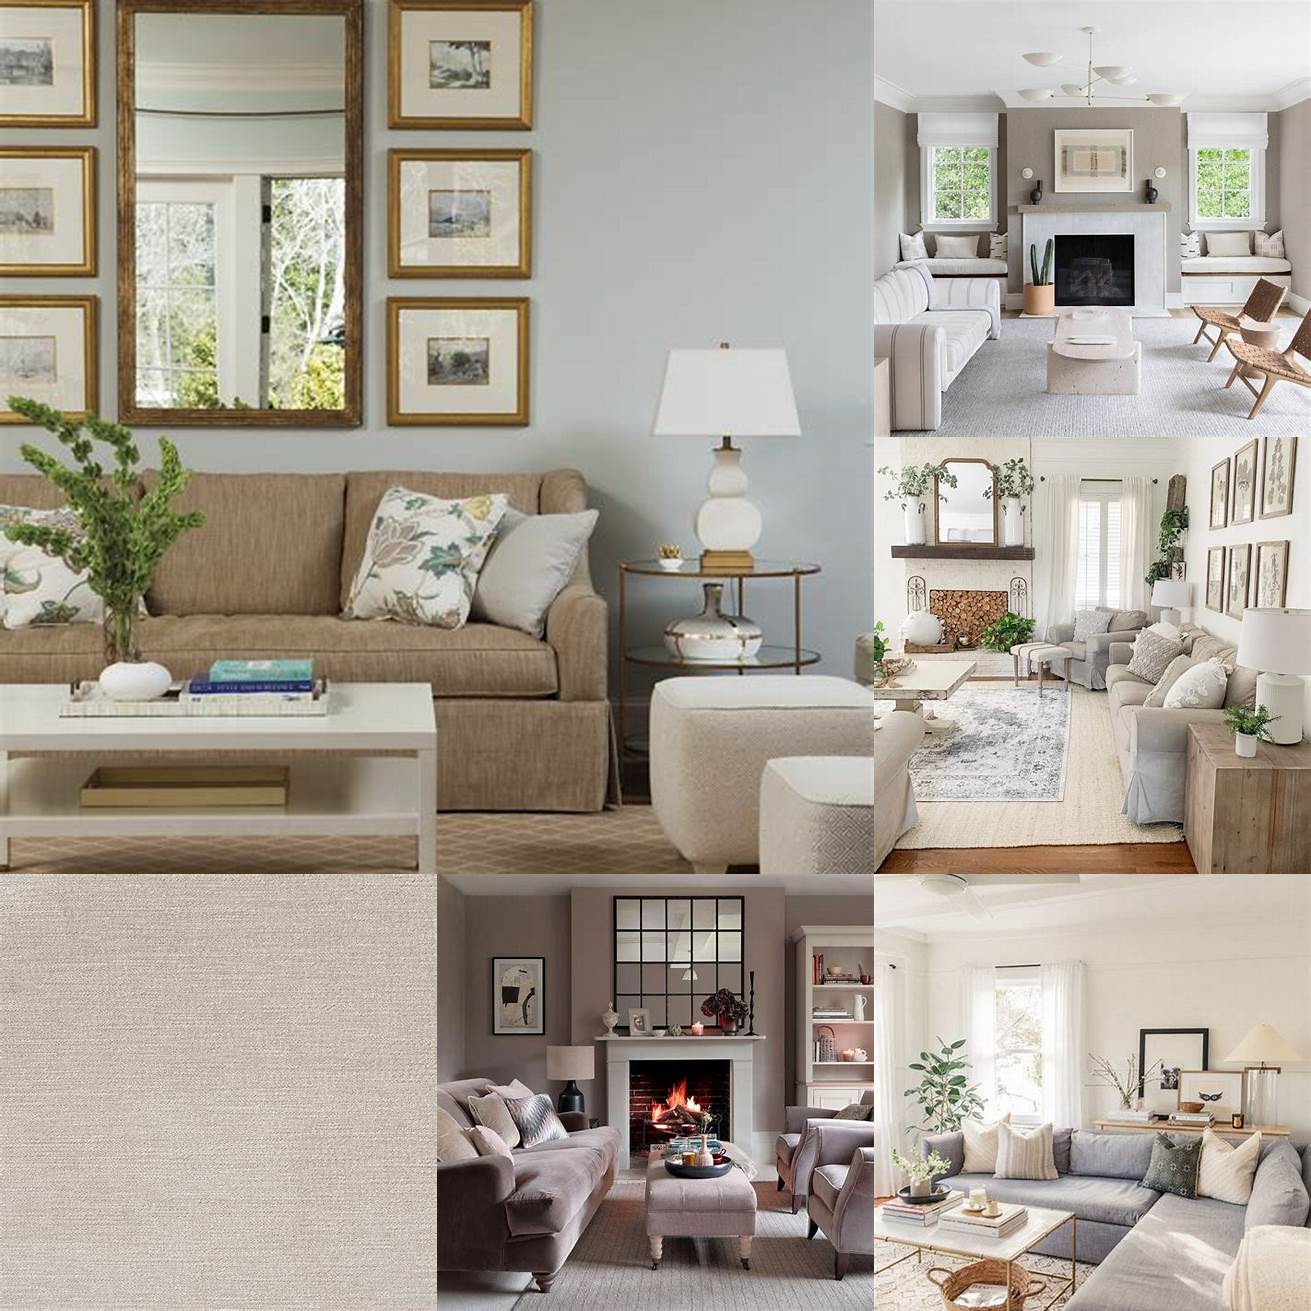 Neutral solid-colored upholstery